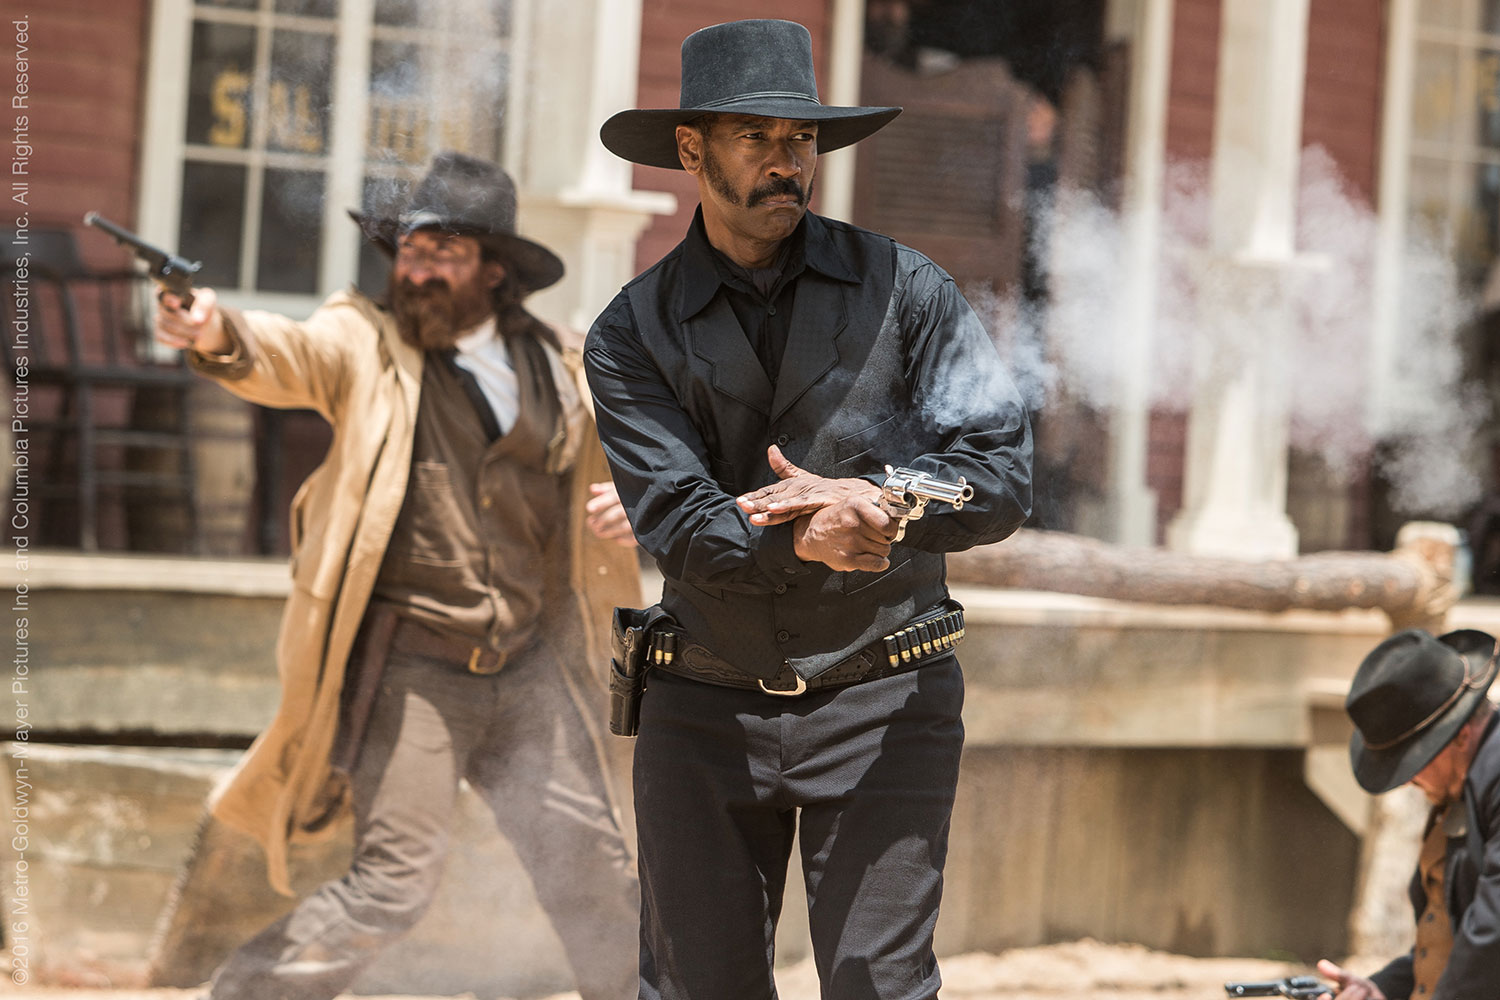 'The Magnificent Seven' movie review by Lucas Mirabella